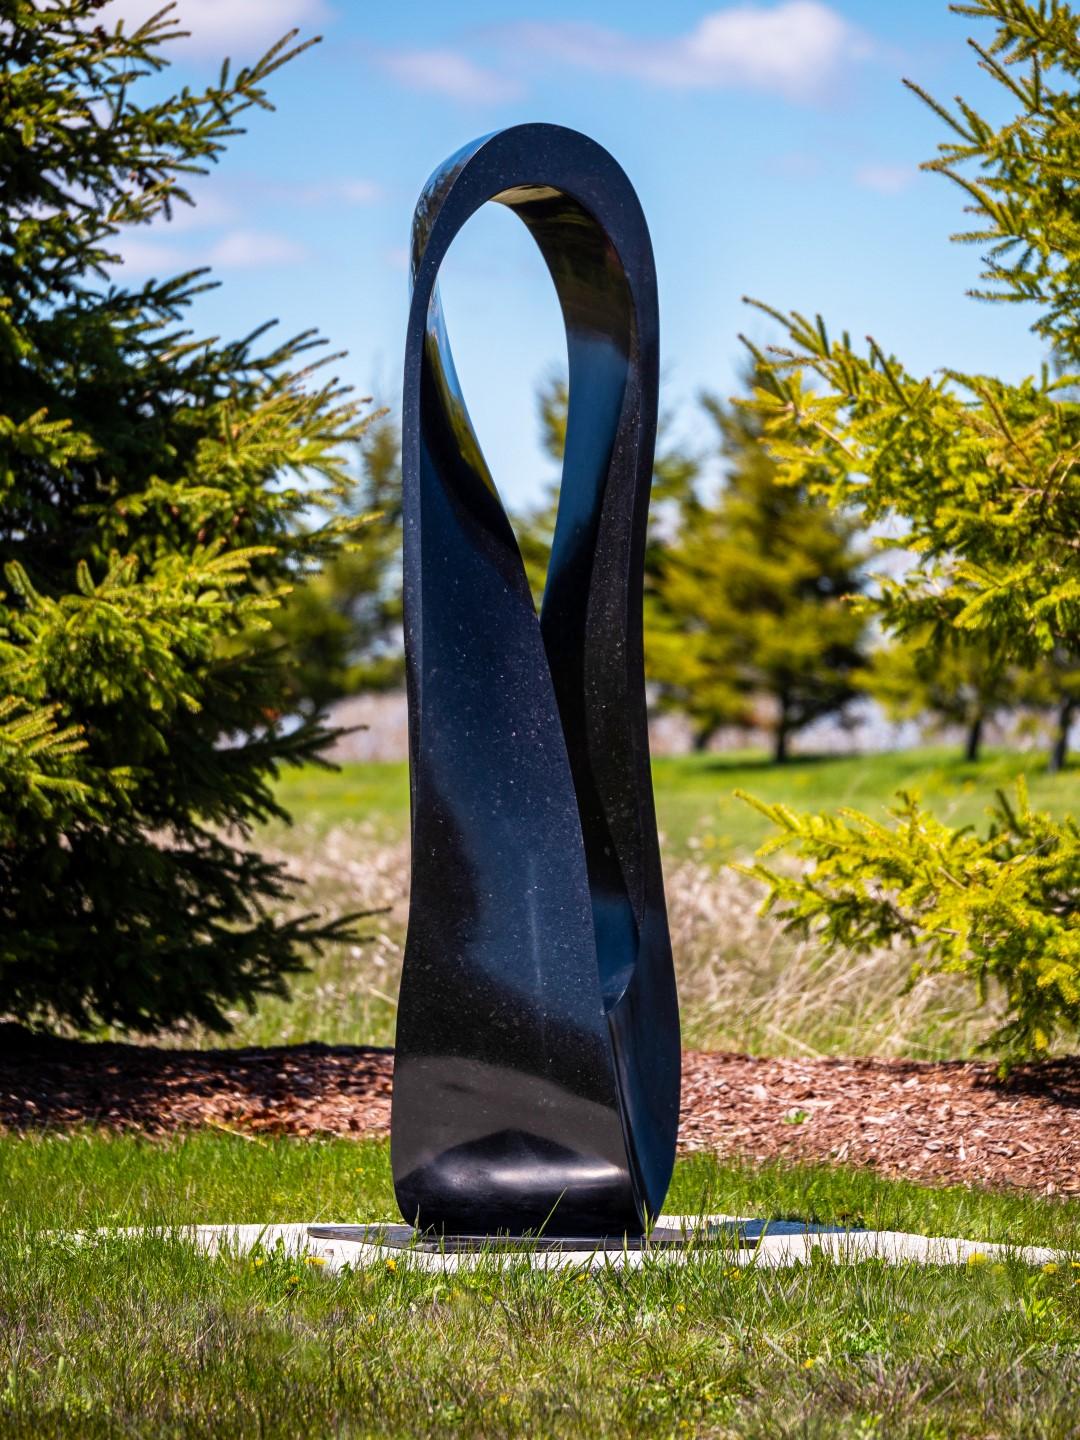 This sculpture is numbered in an edition of 50 and can be purchased on commission basis, please allow 8 - 12 weeks before shipping. The sculpture weighs about 600 lbs. Different base options are available. 

At once graceful and imposing, Jeremy